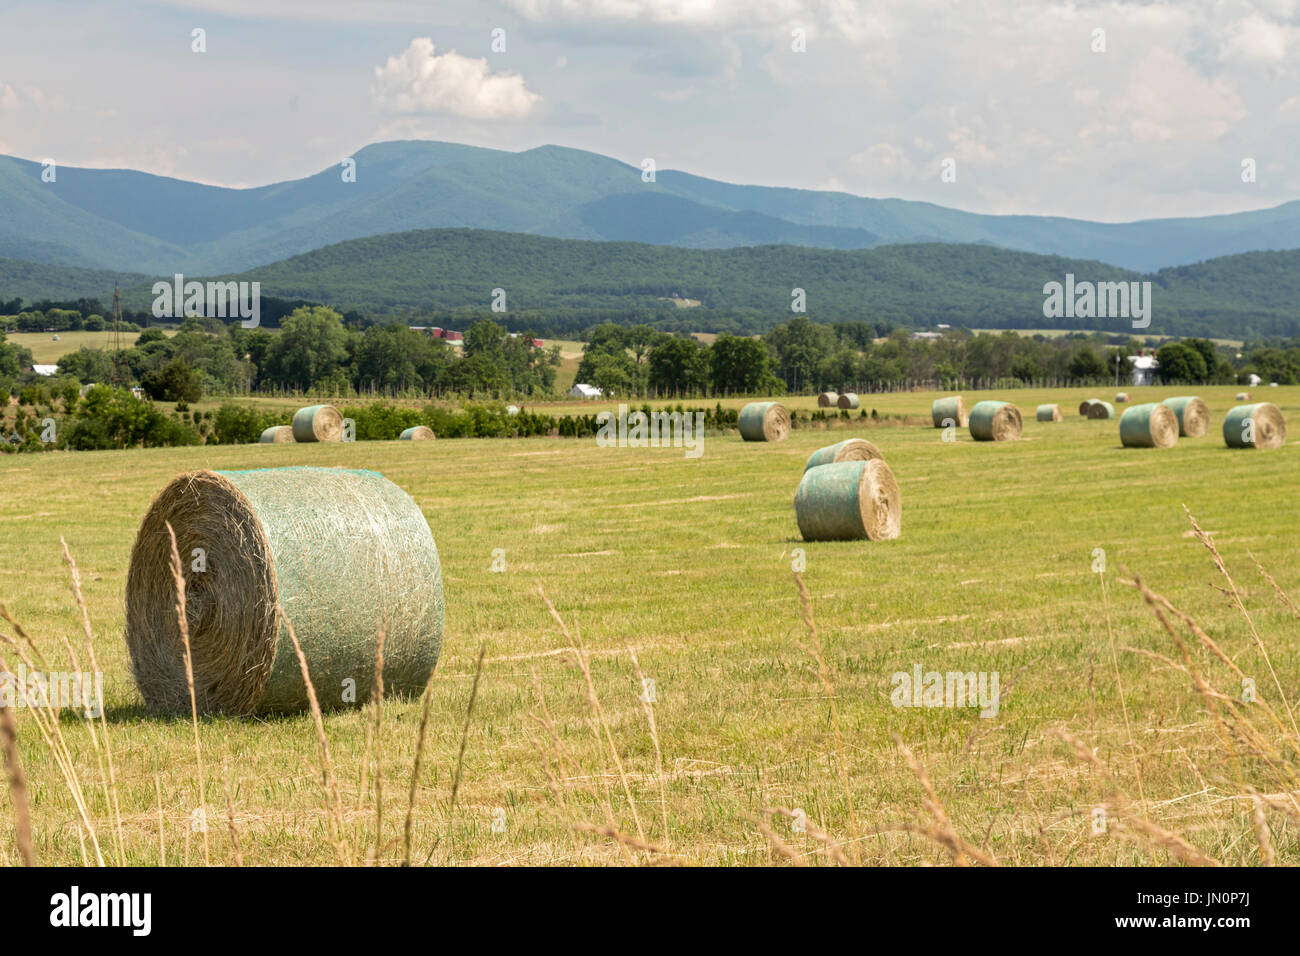 Luray, Virginia - A farm field in the Shenandoah Valley below the Blue Ridge Mountains and Shenandoah National Park. Stock Photo